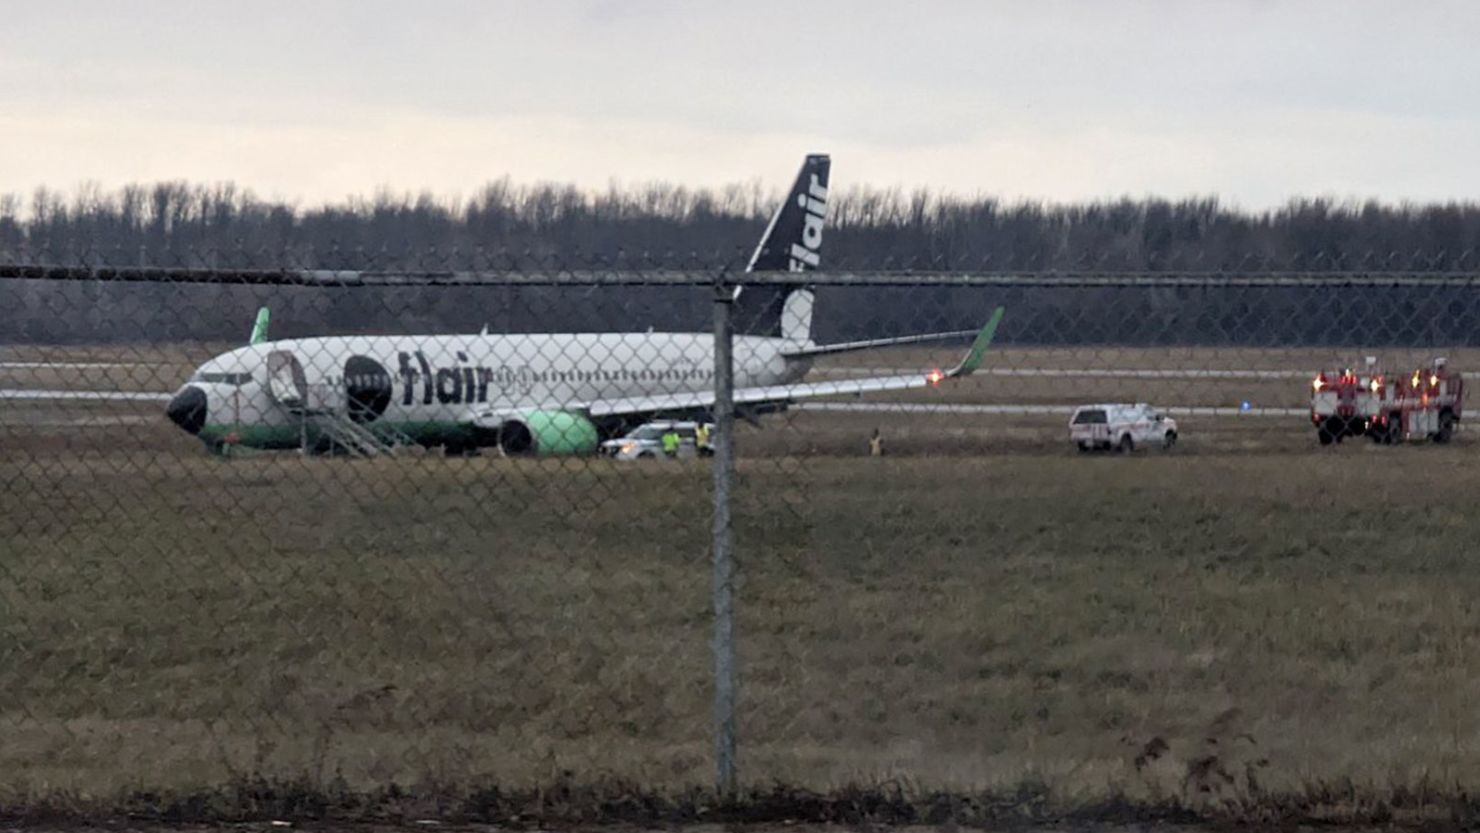 A Flair Airlines plane "exited the runway" at the Region of Waterloo International Airport in Canada on Friday morning, according to a statement from the company.  